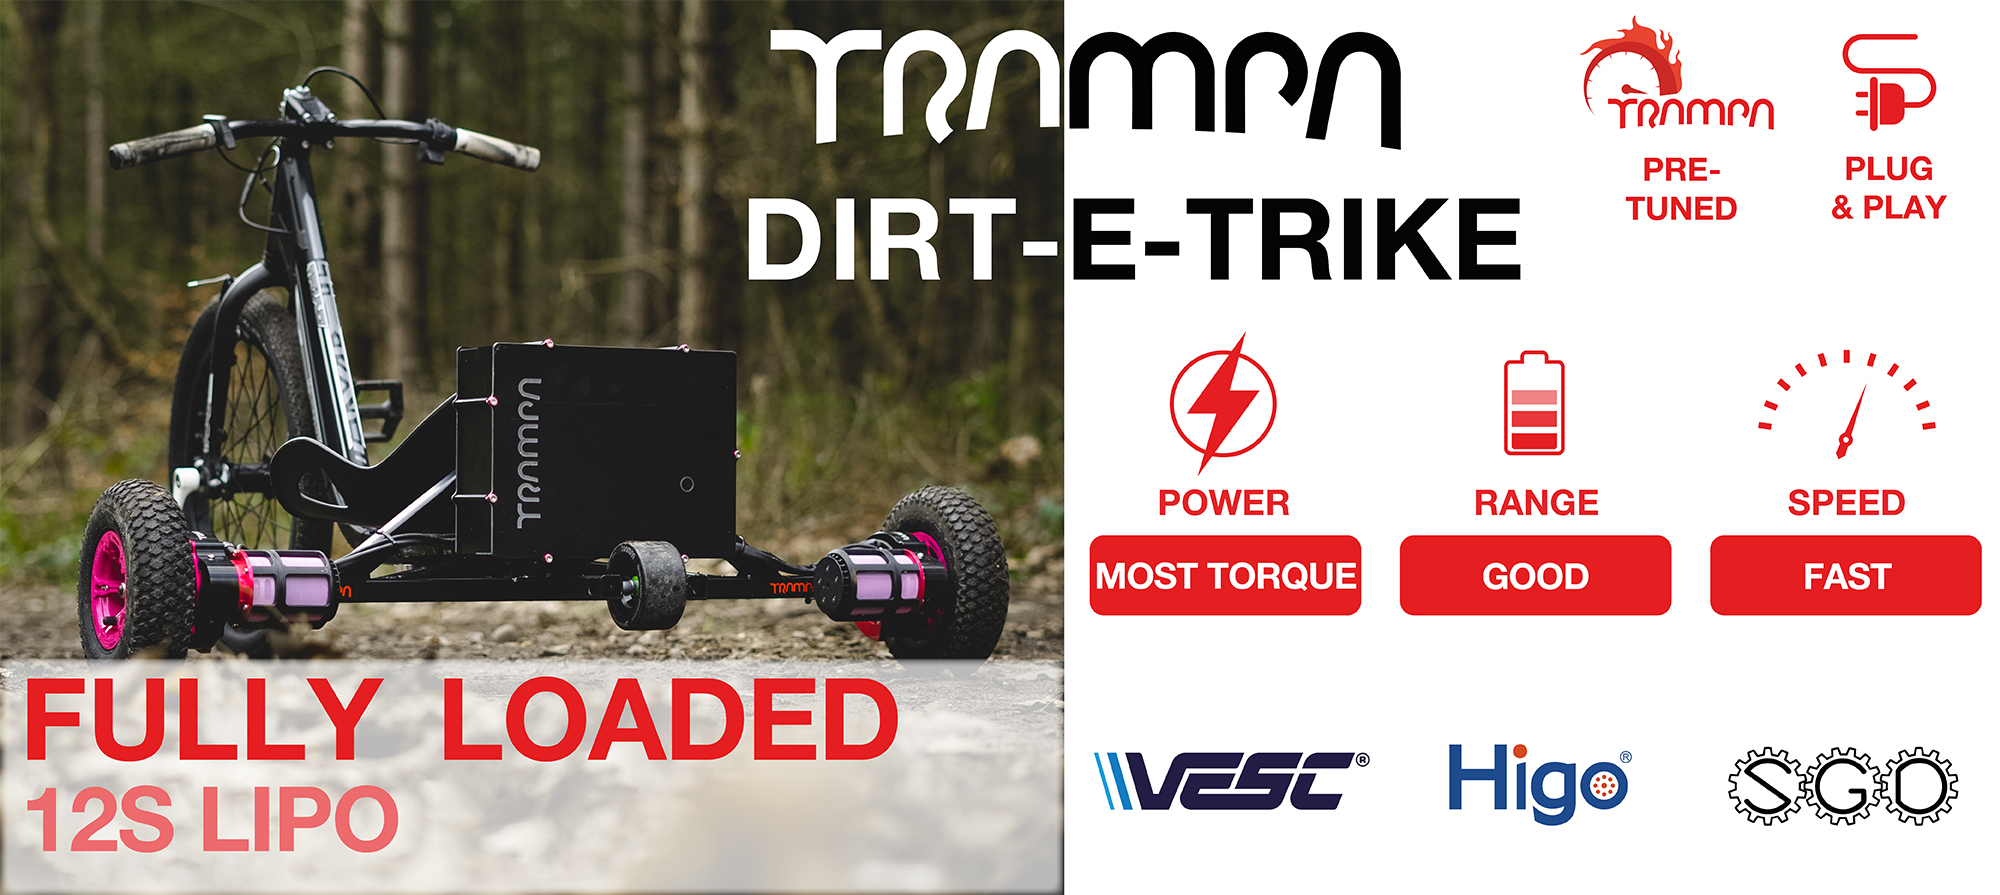 TRAMPA's TRIPE-TRIKE is assembled from many of the exiting parts TRAMPA already uses to make its amazing Electric Mountainboard decks, there fore they have the same if not even more performance than the decks!!